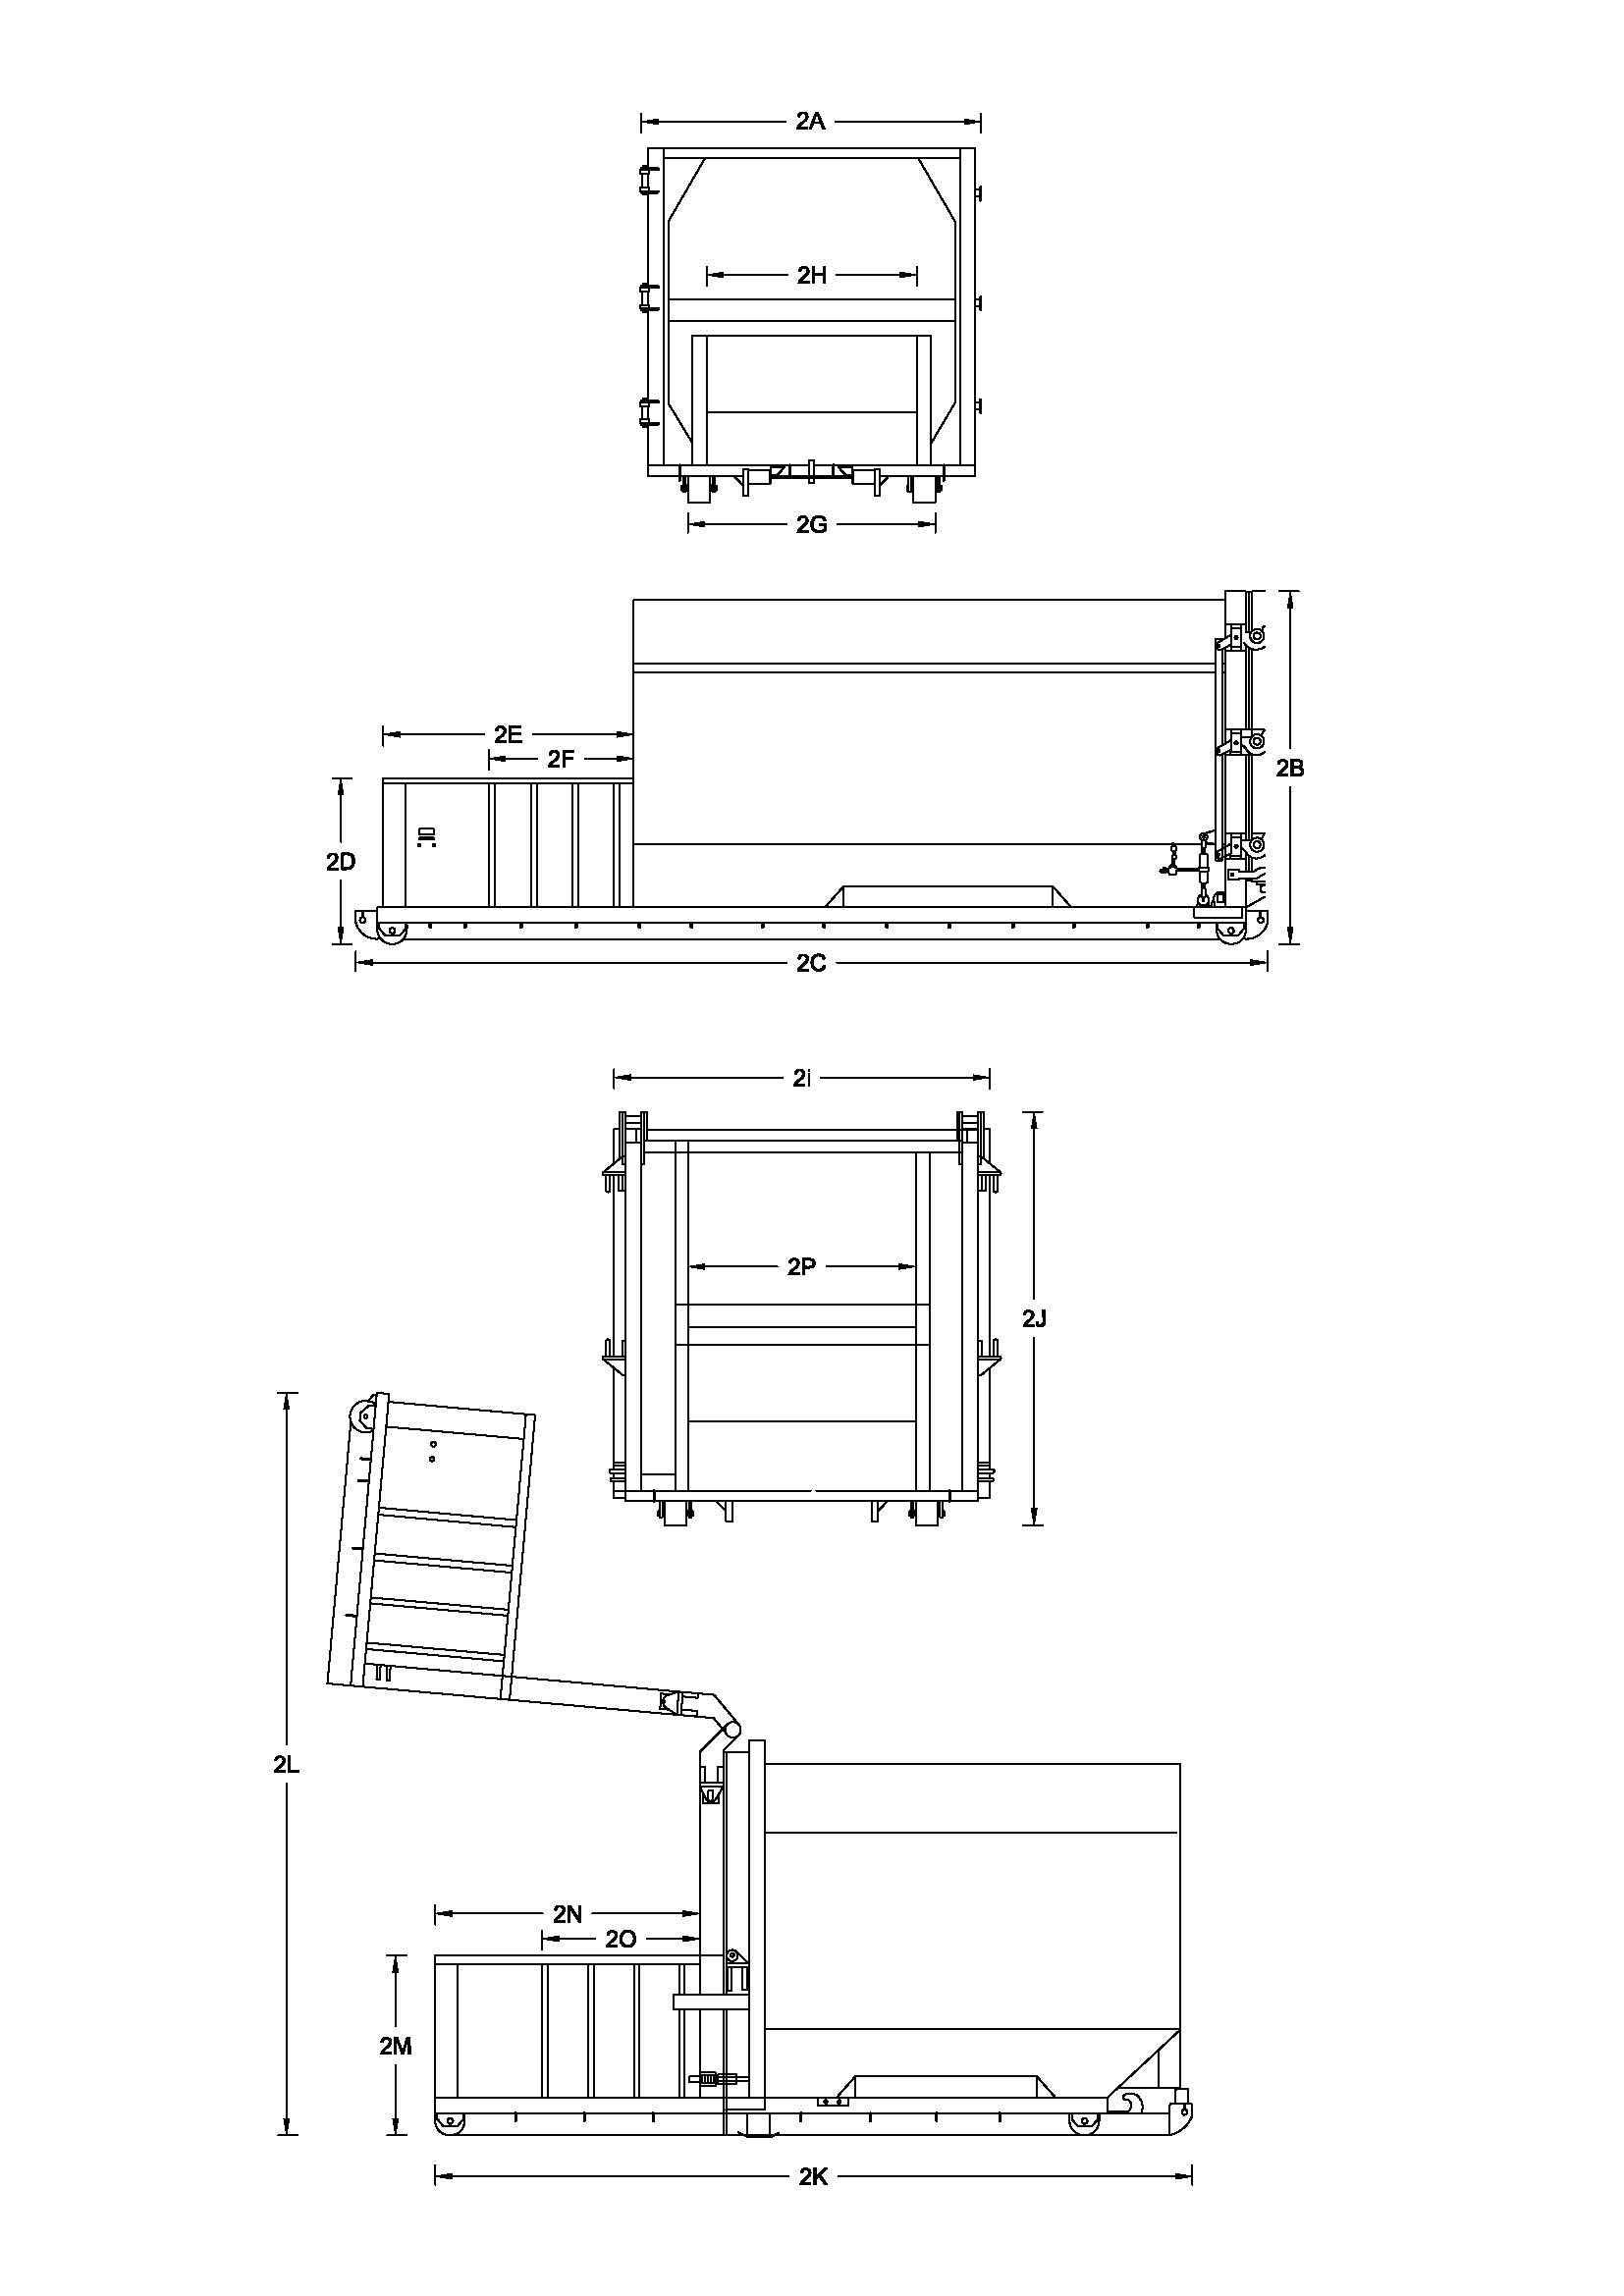 Self Contained Compactors Diagram - 2 Yard Charge Box